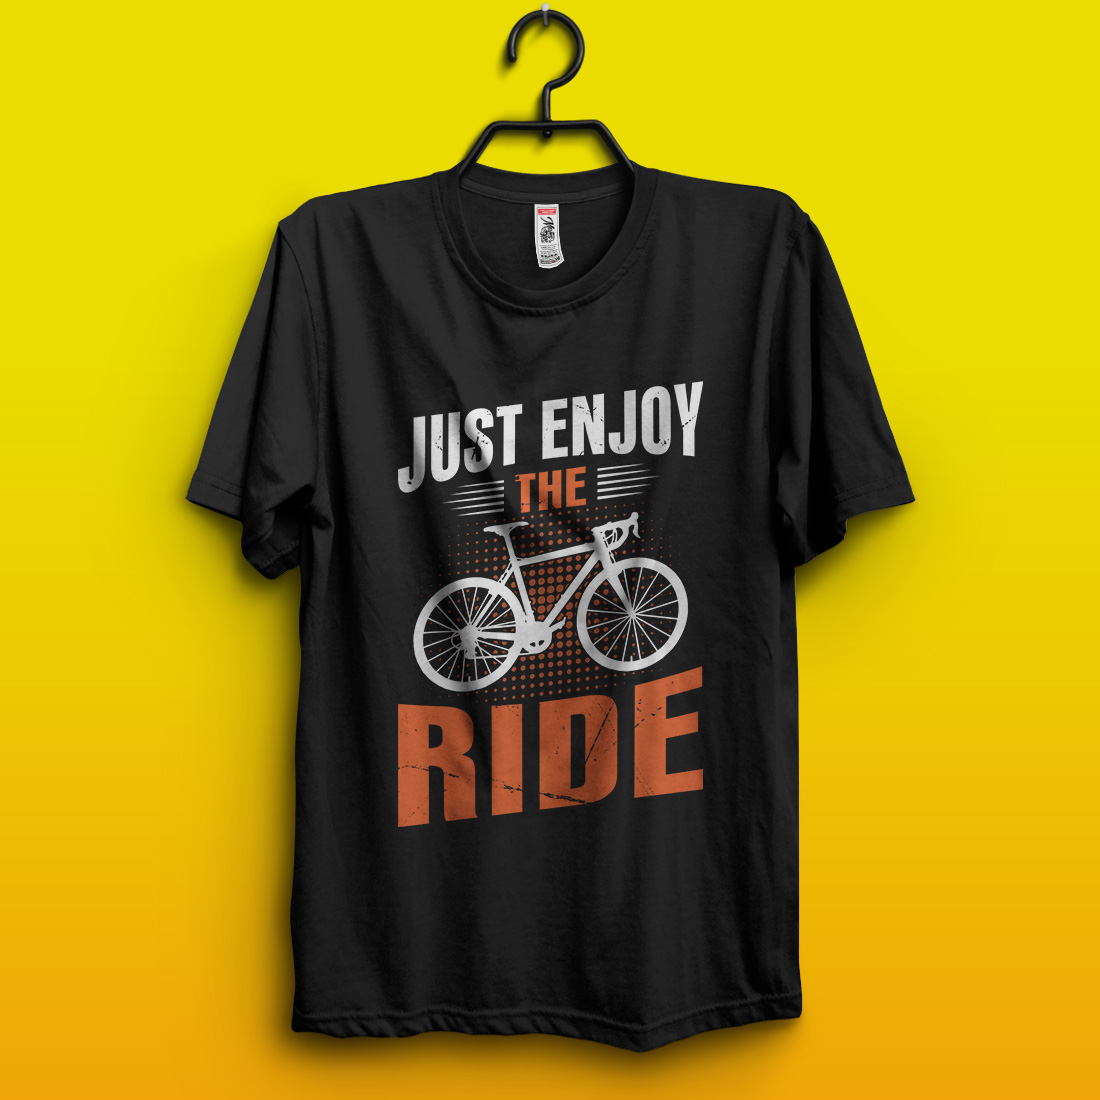 Just enjoy the ride – Cycling quotes t-shirt design for adventure lovers pinterest preview image.